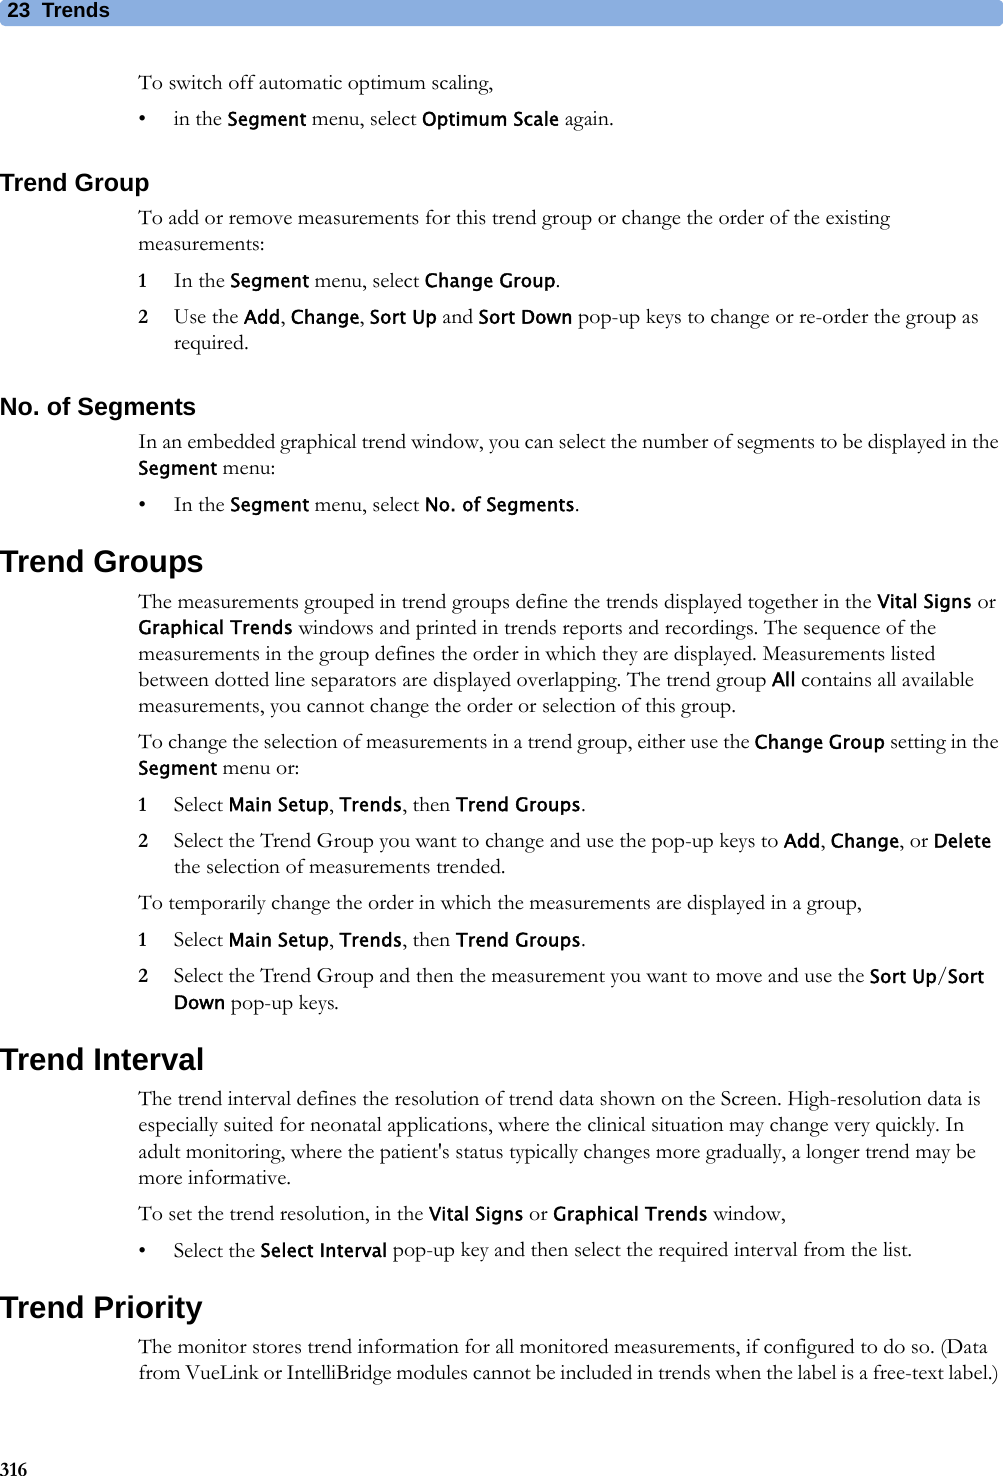 23 Trends316To switch off automatic optimum scaling,•in the Segment menu, select Optimum Scale again.Trend GroupTo add or remove measurements for this trend group or change the order of the existing measurements:1In the Segment menu, select Change Group.2Use the Add, Change, Sort Up and Sort Down pop-up keys to change or re-order the group as required.No. of SegmentsIn an embedded graphical trend window, you can select the number of segments to be displayed in the Segment menu:•In the Segment menu, select No. of Segments.Trend GroupsThe measurements grouped in trend groups define the trends displayed together in the Vital Signs or Graphical Trends windows and printed in trends reports and recordings. The sequence of the measurements in the group defines the order in which they are displayed. Measurements listed between dotted line separators are displayed overlapping. The trend group All contains all available measurements, you cannot change the order or selection of this group.To change the selection of measurements in a trend group, either use the Change Group setting in the Segment menu or:1Select Main Setup, Trends, then Trend Groups.2Select the Trend Group you want to change and use the pop-up keys to Add, Change, or Delete the selection of measurements trended.To temporarily change the order in which the measurements are displayed in a group,1Select Main Setup, Trends, then Trend Groups.2Select the Trend Group and then the measurement you want to move and use the Sort Up/Sort Down pop-up keys.Trend IntervalThe trend interval defines the resolution of trend data shown on the Screen. High-resolution data is especially suited for neonatal applications, where the clinical situation may change very quickly. In adult monitoring, where the patient&apos;s status typically changes more gradually, a longer trend may be more informative.To set the trend resolution, in the Vital Signs or Graphical Trends window,• Select the Select Interval pop-up key and then select the required interval from the list.Trend PriorityThe monitor stores trend information for all monitored measurements, if configured to do so. (Data from VueLink or IntelliBridge modules cannot be included in trends when the label is a free-text label.) 